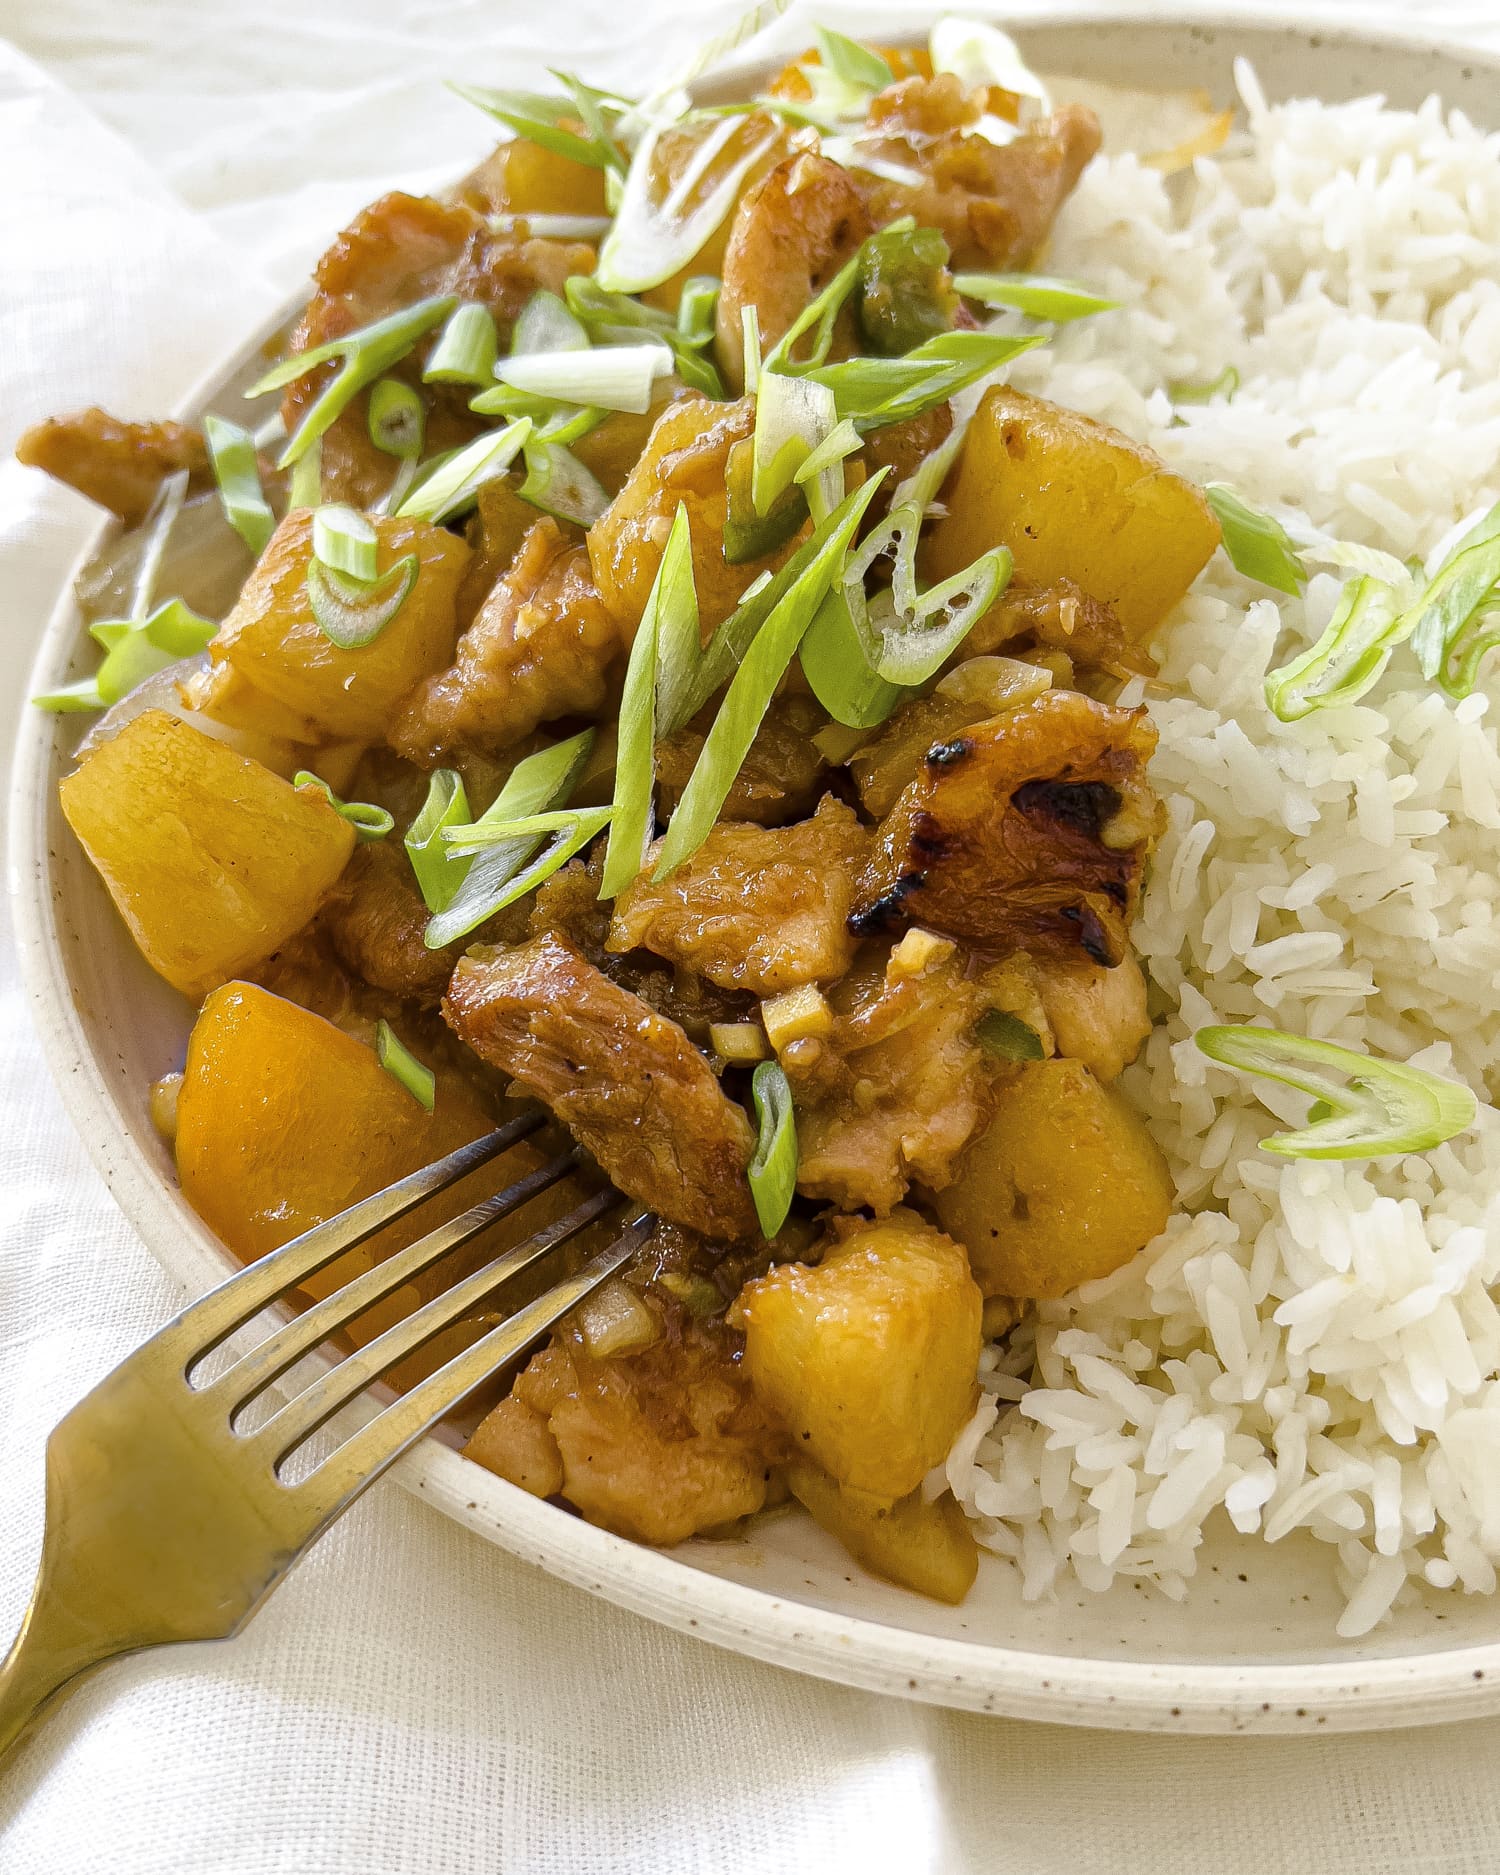 Pineapple Chicken Is a Sweet and Savory Stir-Fry Your Whole Family Will Love